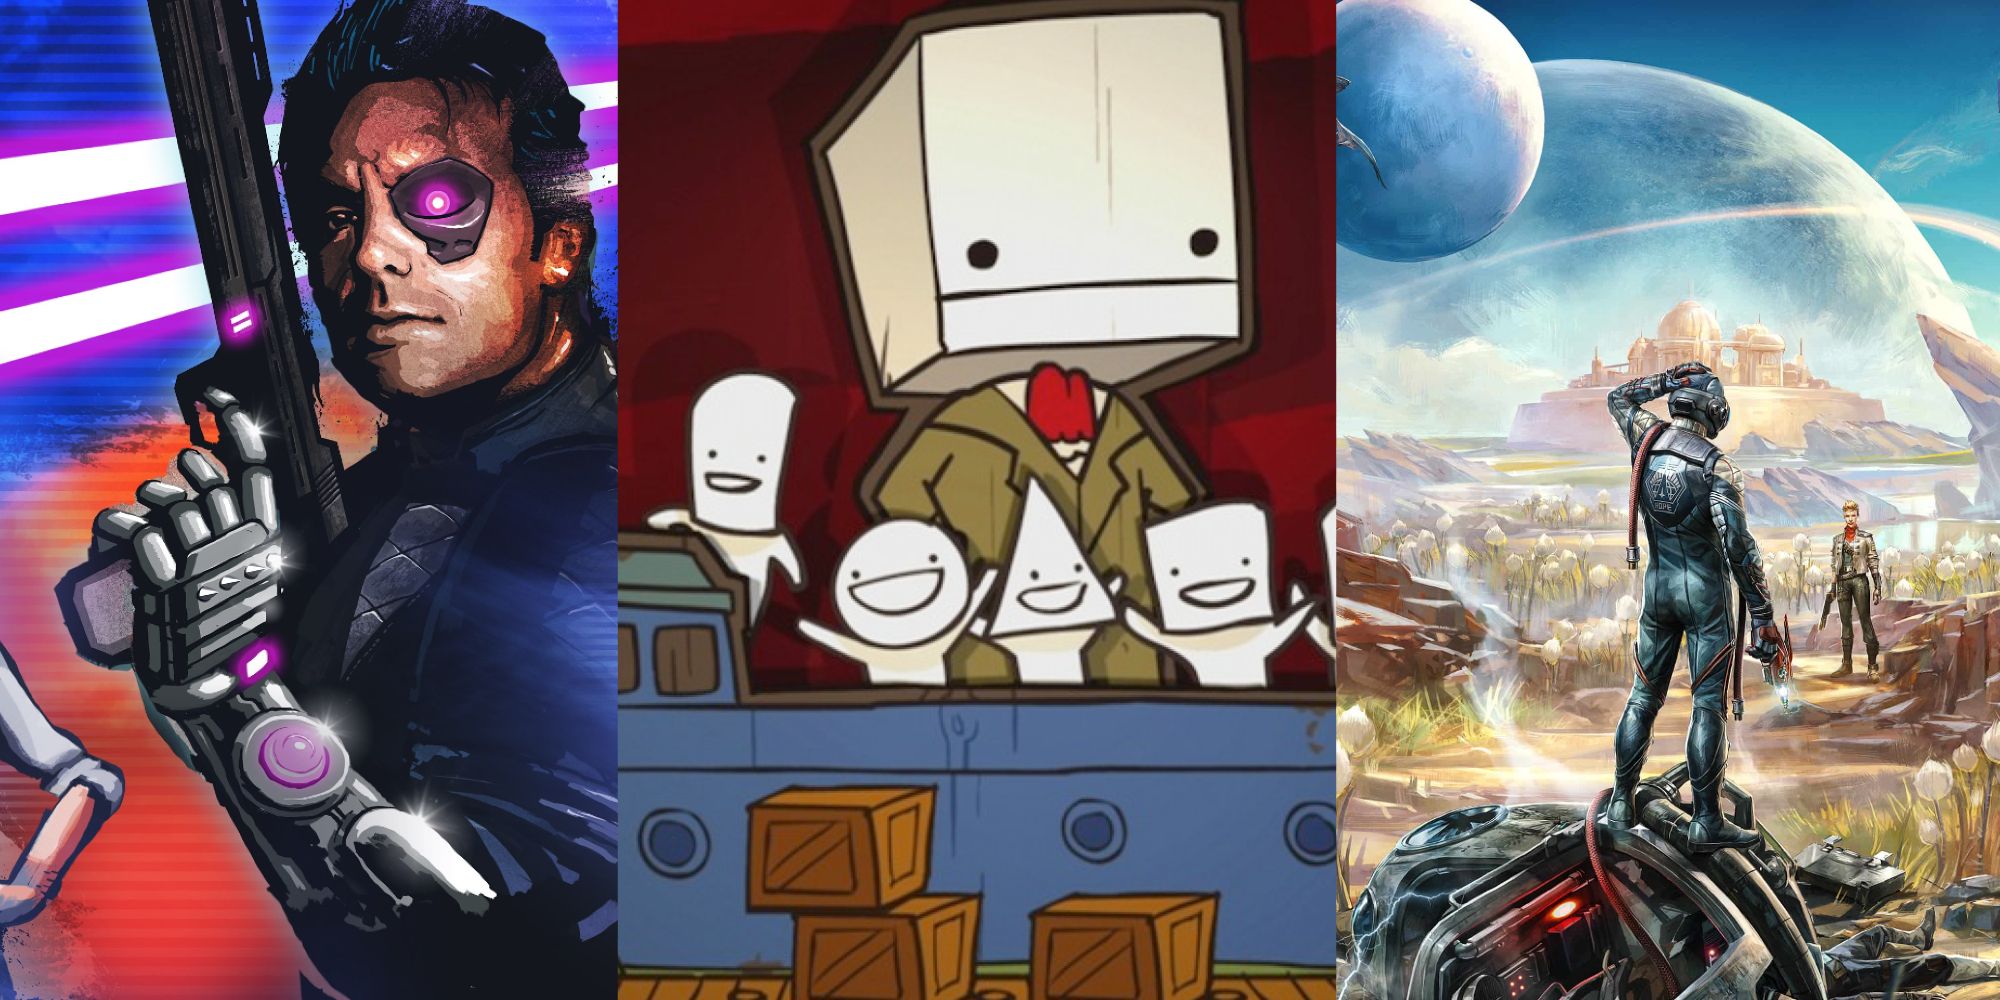 Split Image of Far Cry 3 Blood Dragon, Battleblock Theater, and The Outer Worlds